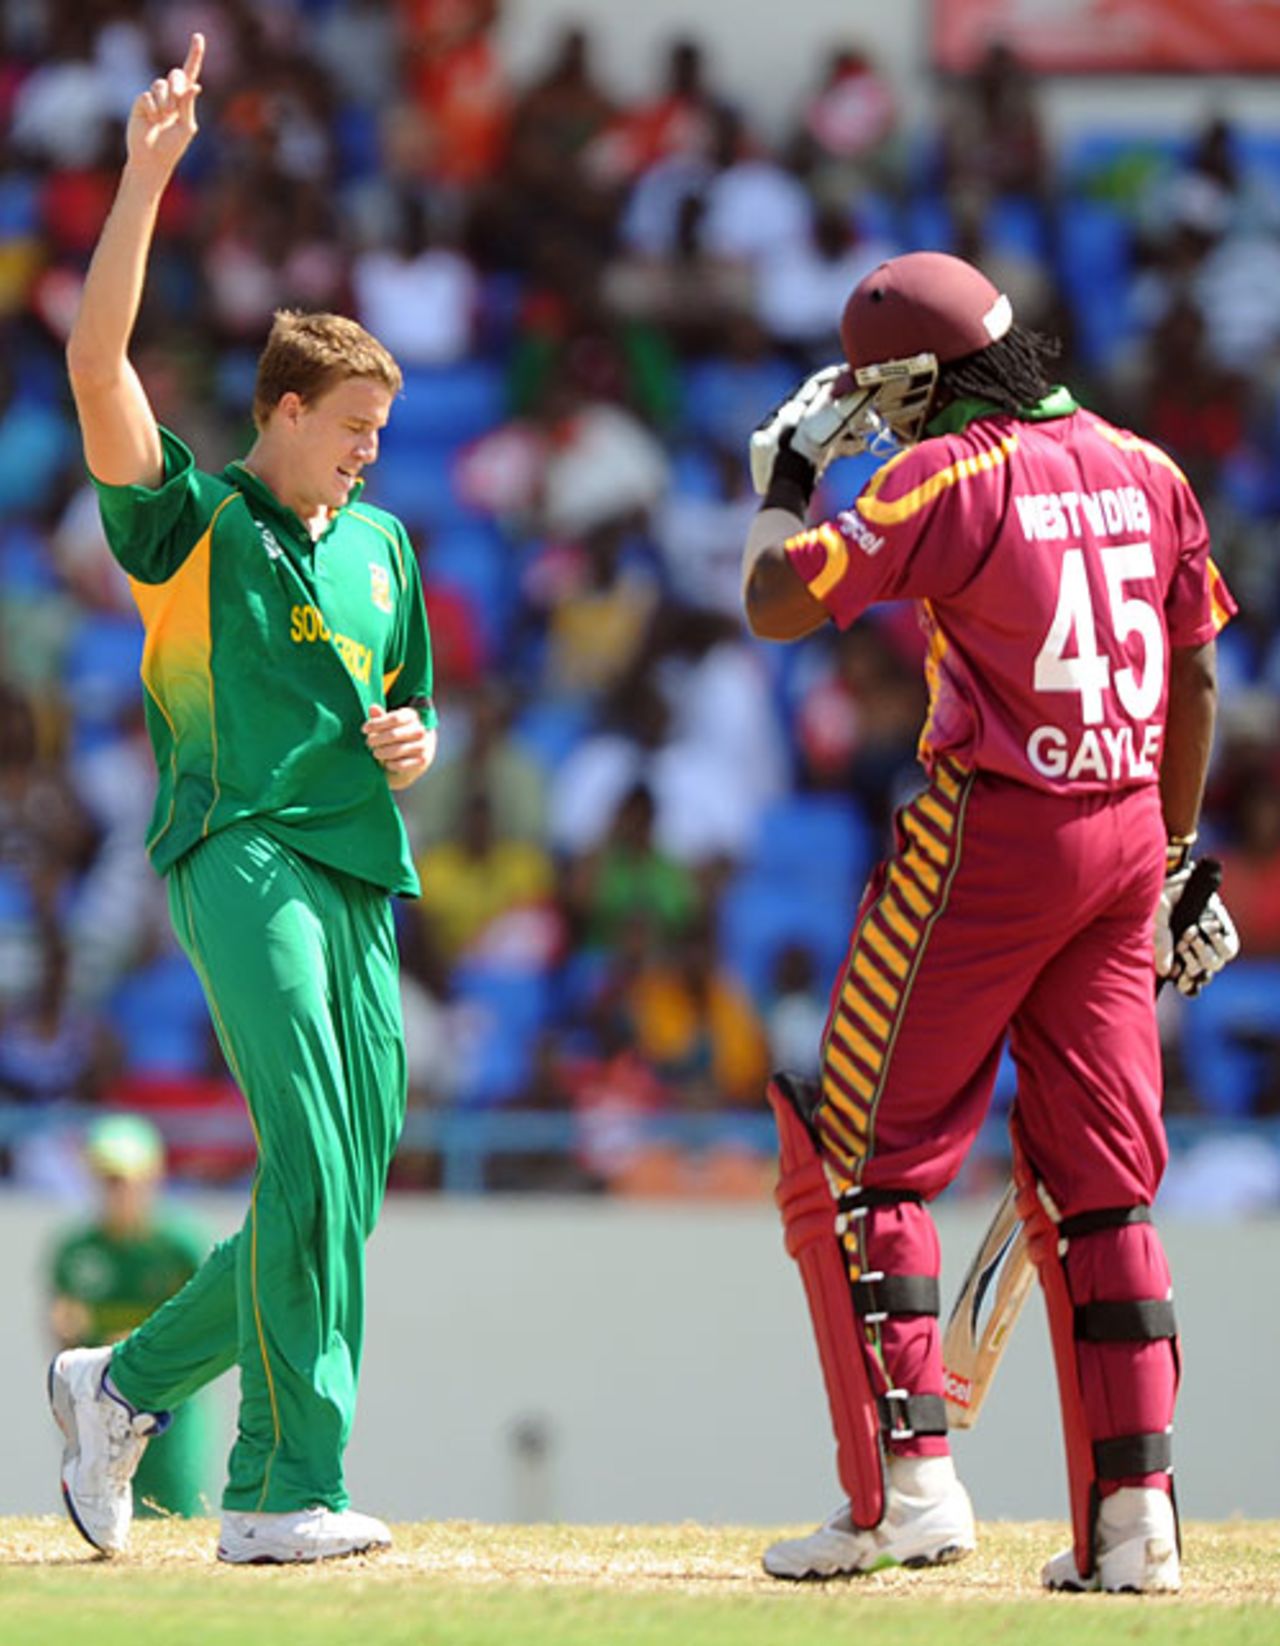 Morne Morkel claimed the crucial wicket of Chris Gayle to give South Africa control, West Indies v South Africa, 2nd ODI, Antigua, May 24, 2010